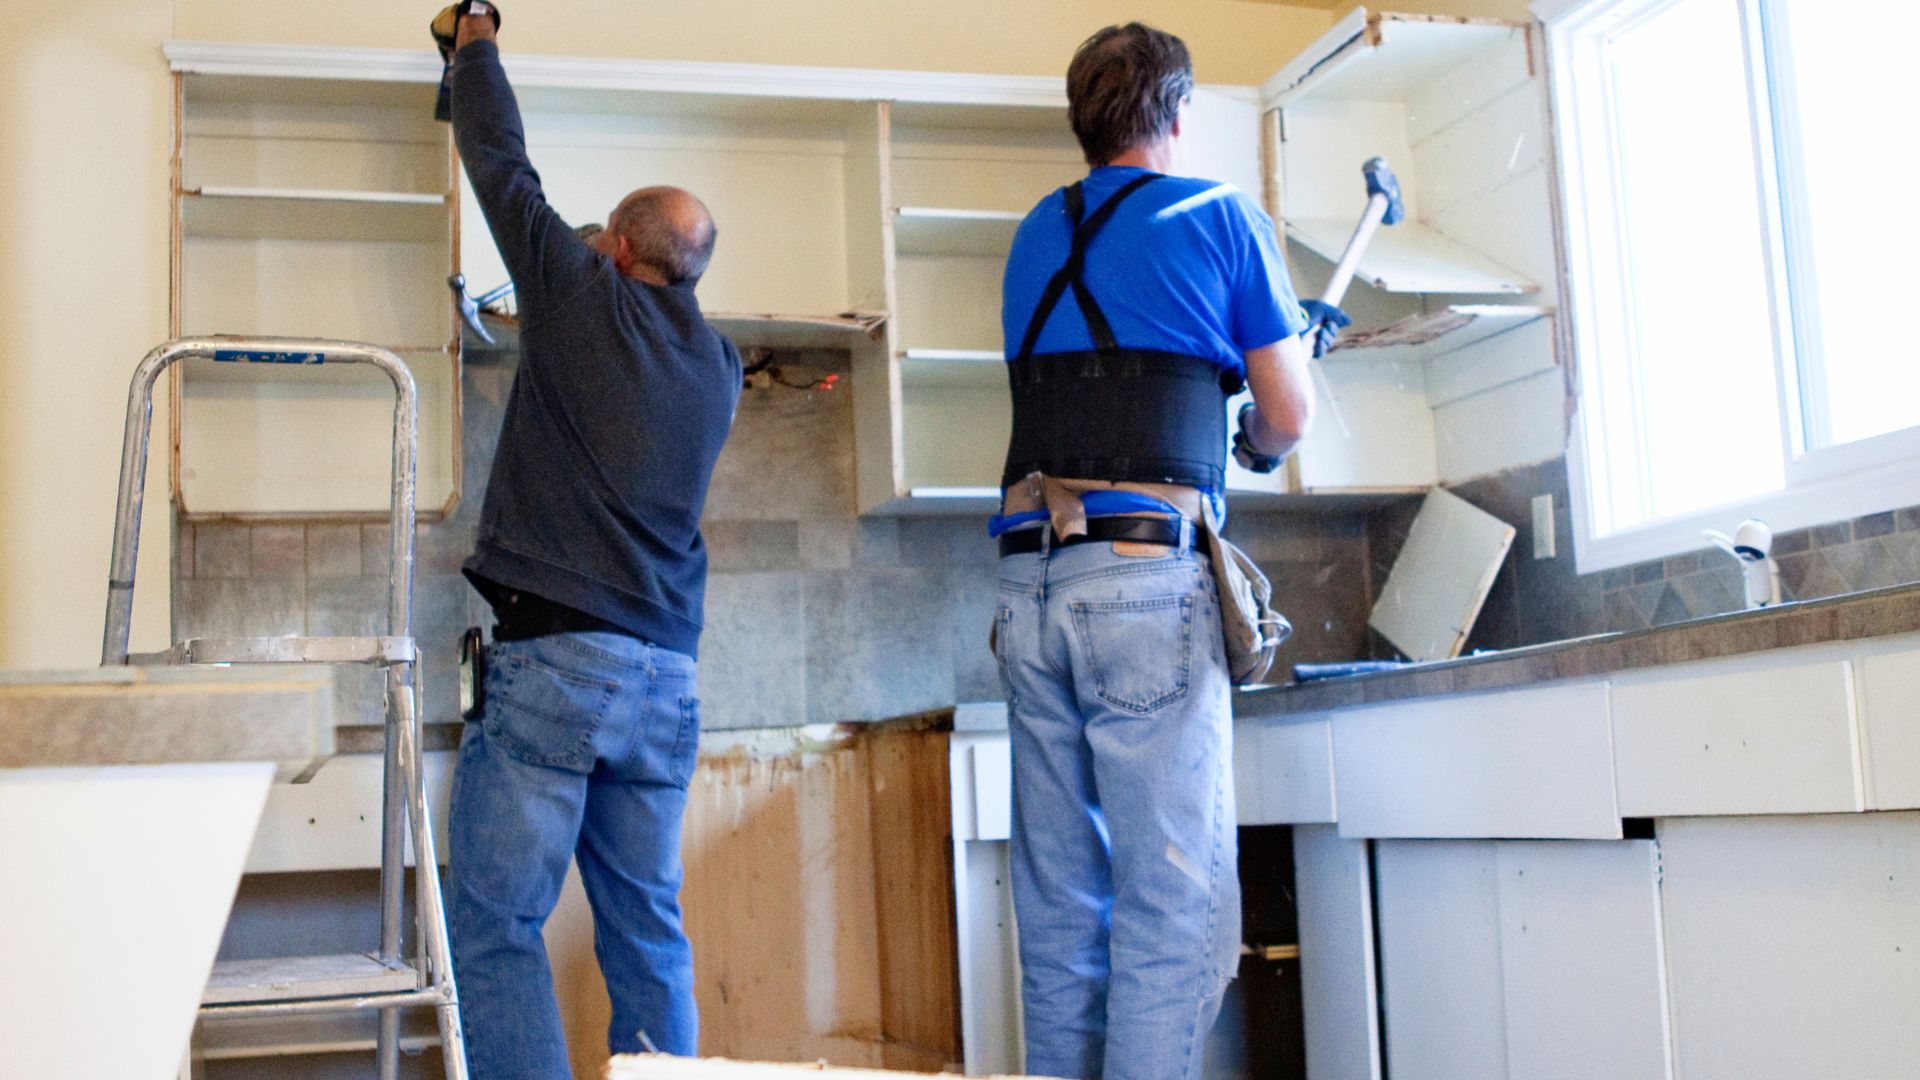 For your kitchen renovation plumbing needs, get in touch with us, where we offer specialized services tailored for plumbers.